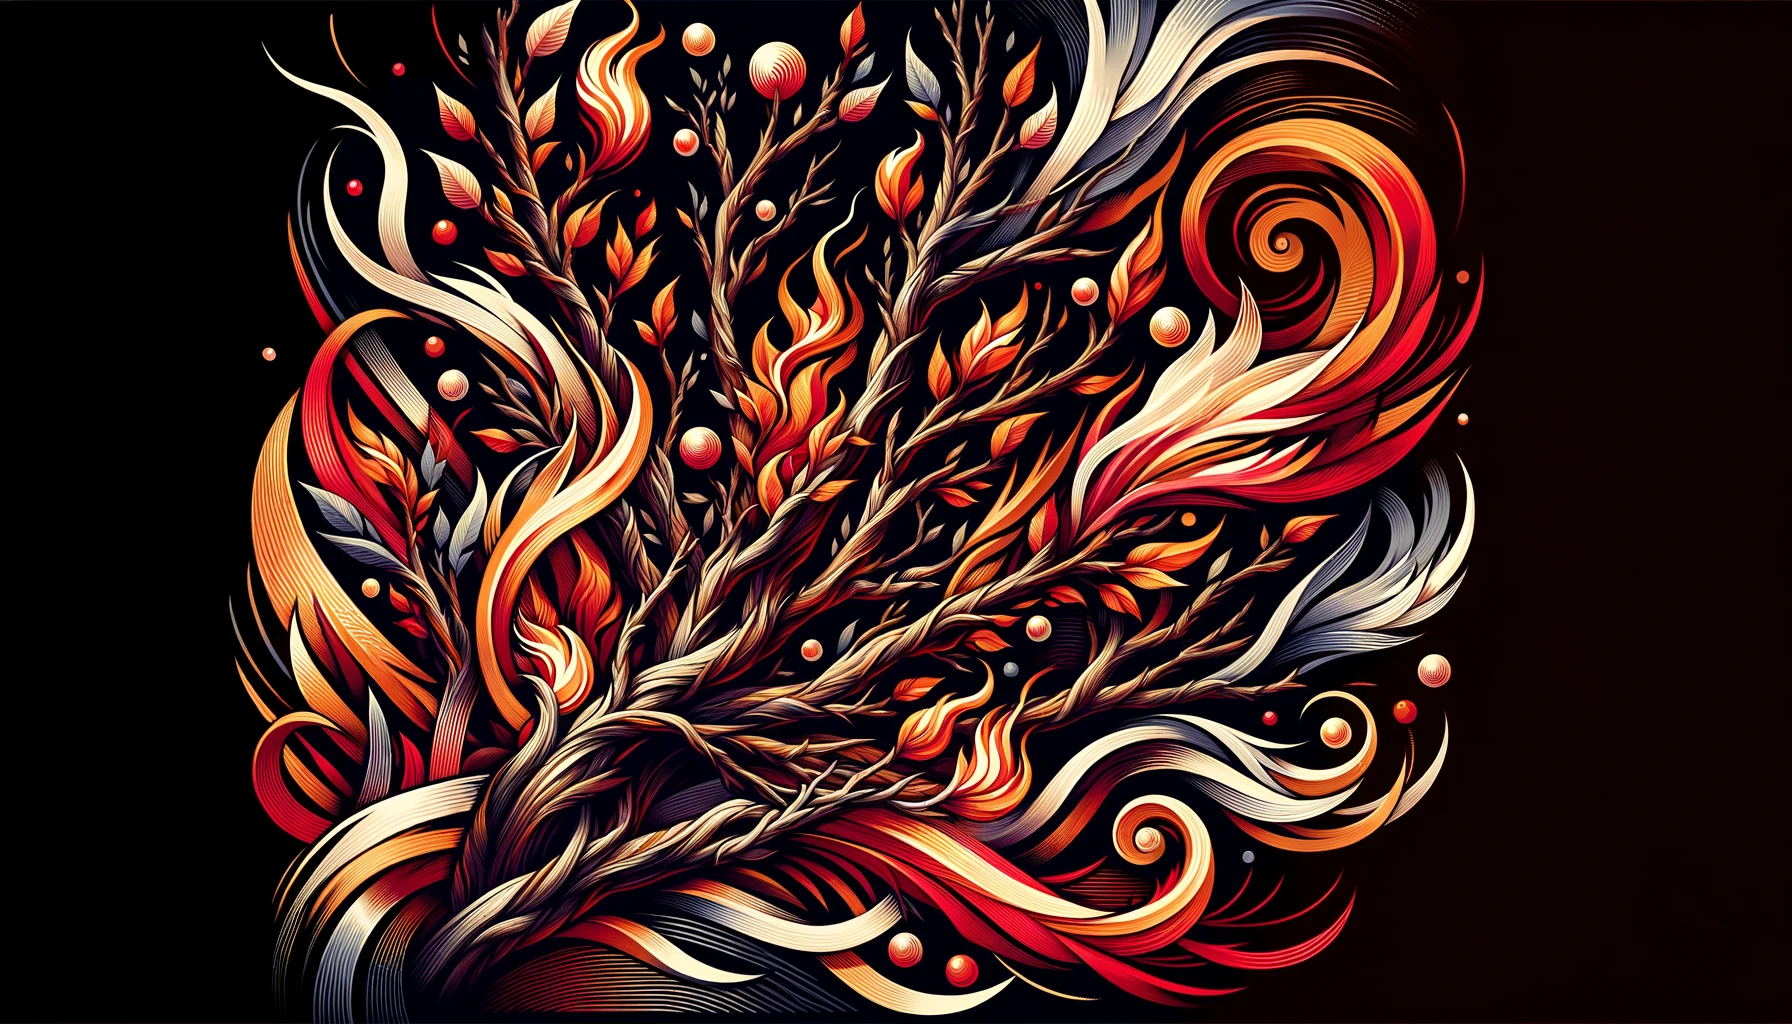 Create a dynamic and vibrant 169 image that emphasizes the branches while capturing the fiery energy and passion of the Wands suit in the Minor Arcana of tarot In this variation the fl